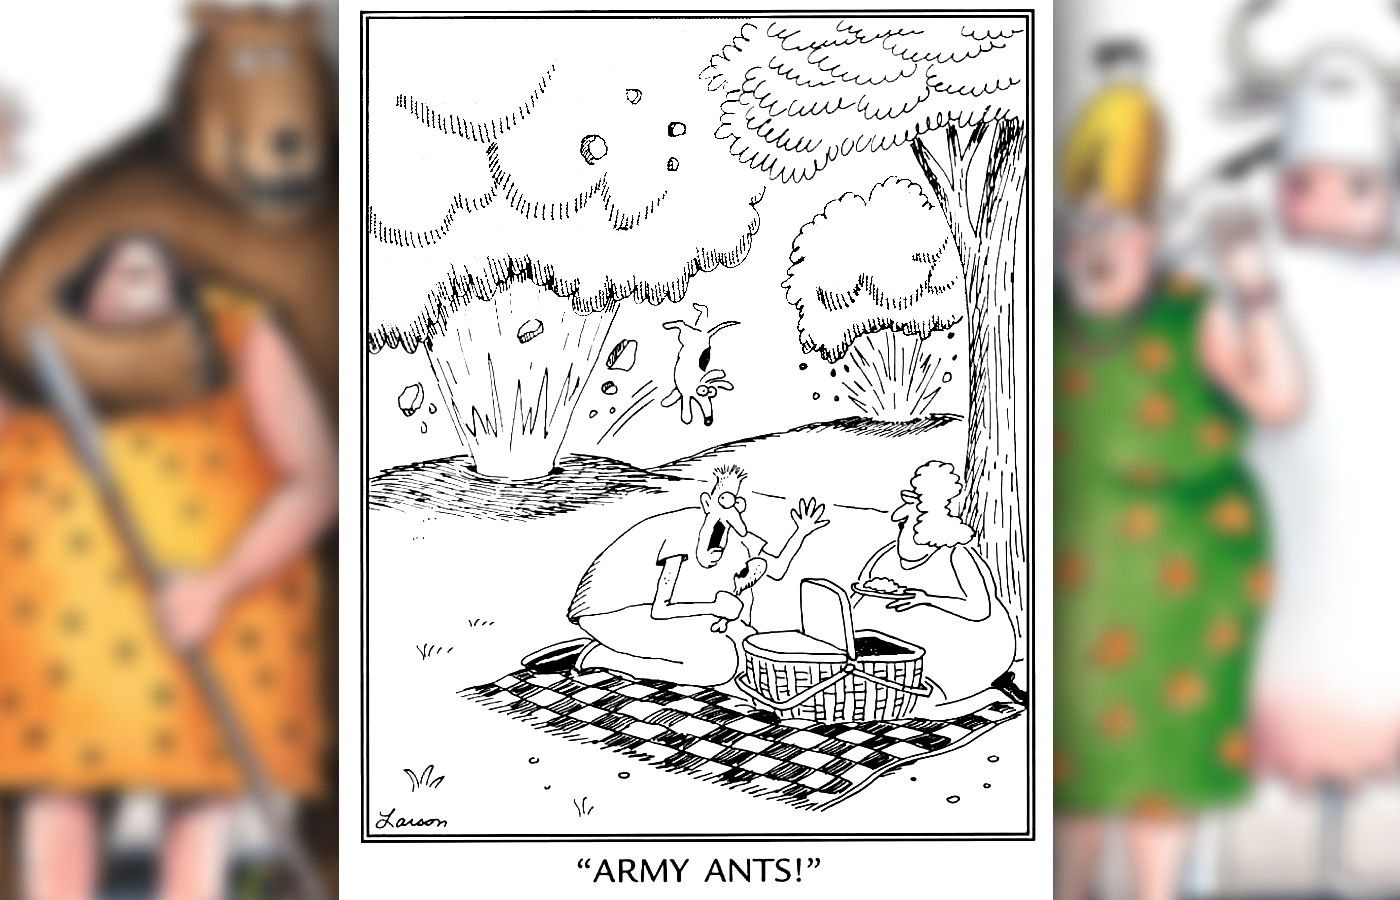 far side comic where army ants have explosives